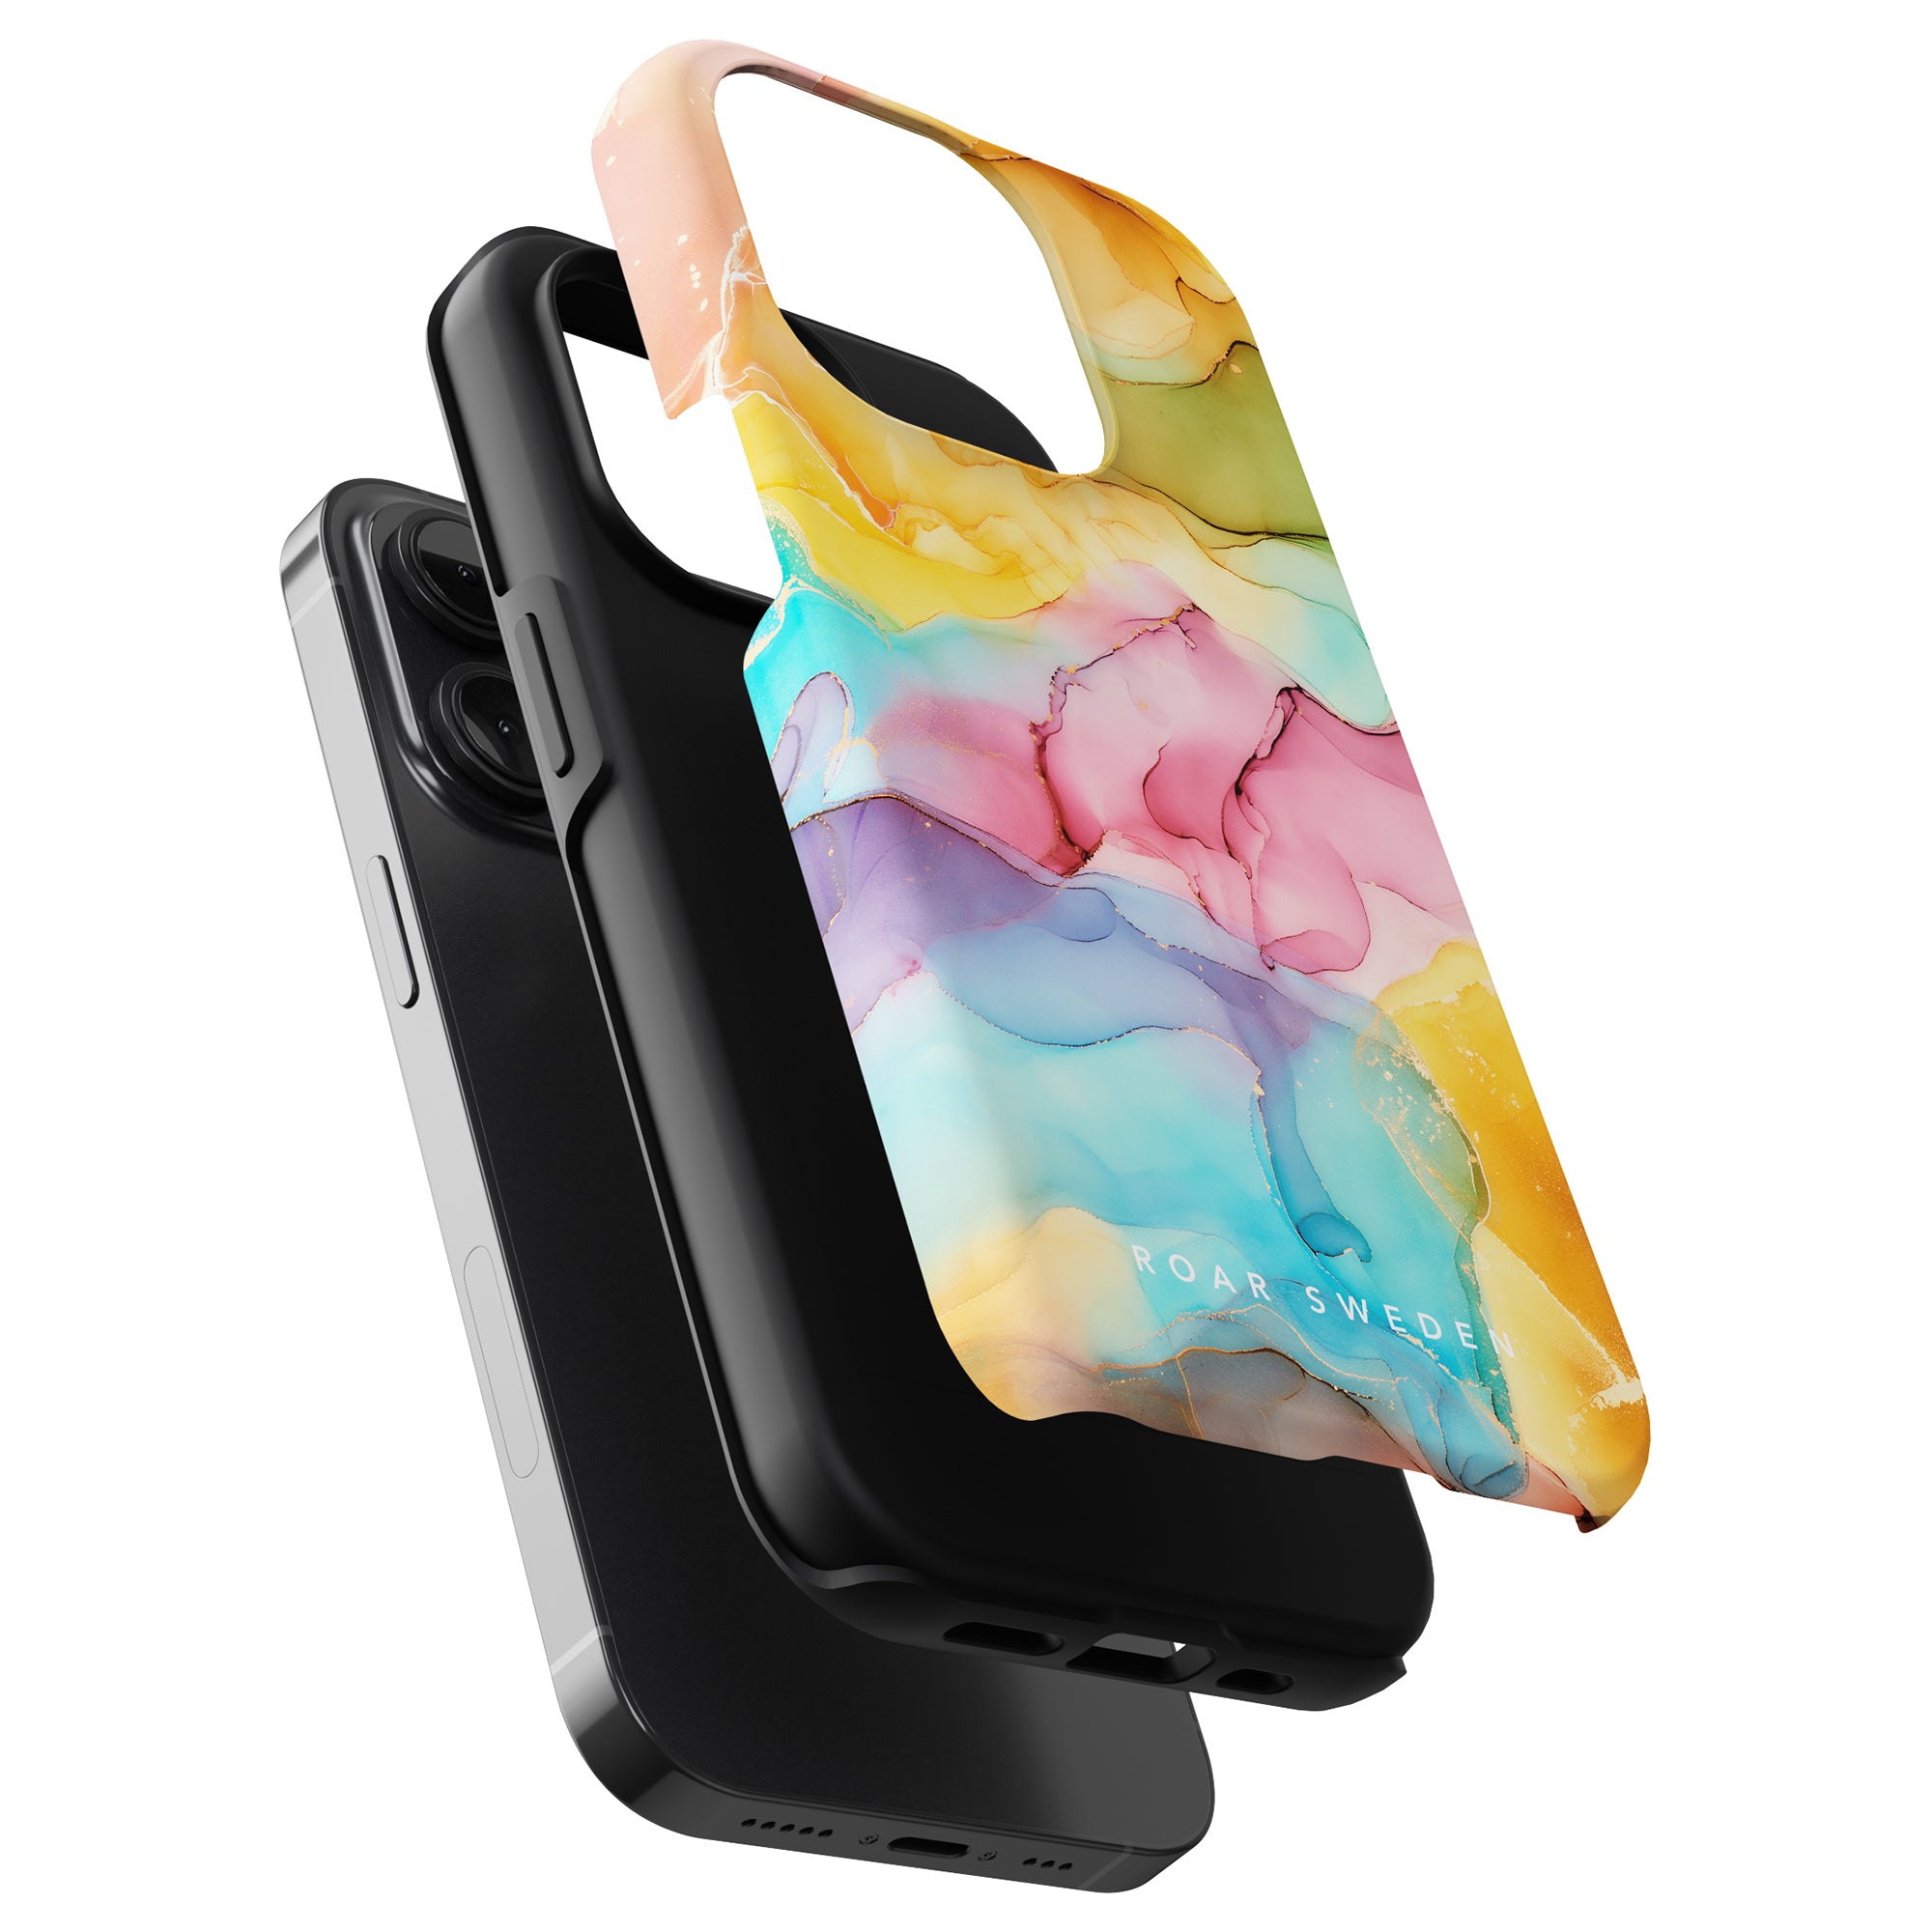 A black smartphone encased in a Summer Breeze tough case, attached to a strap against a white background.